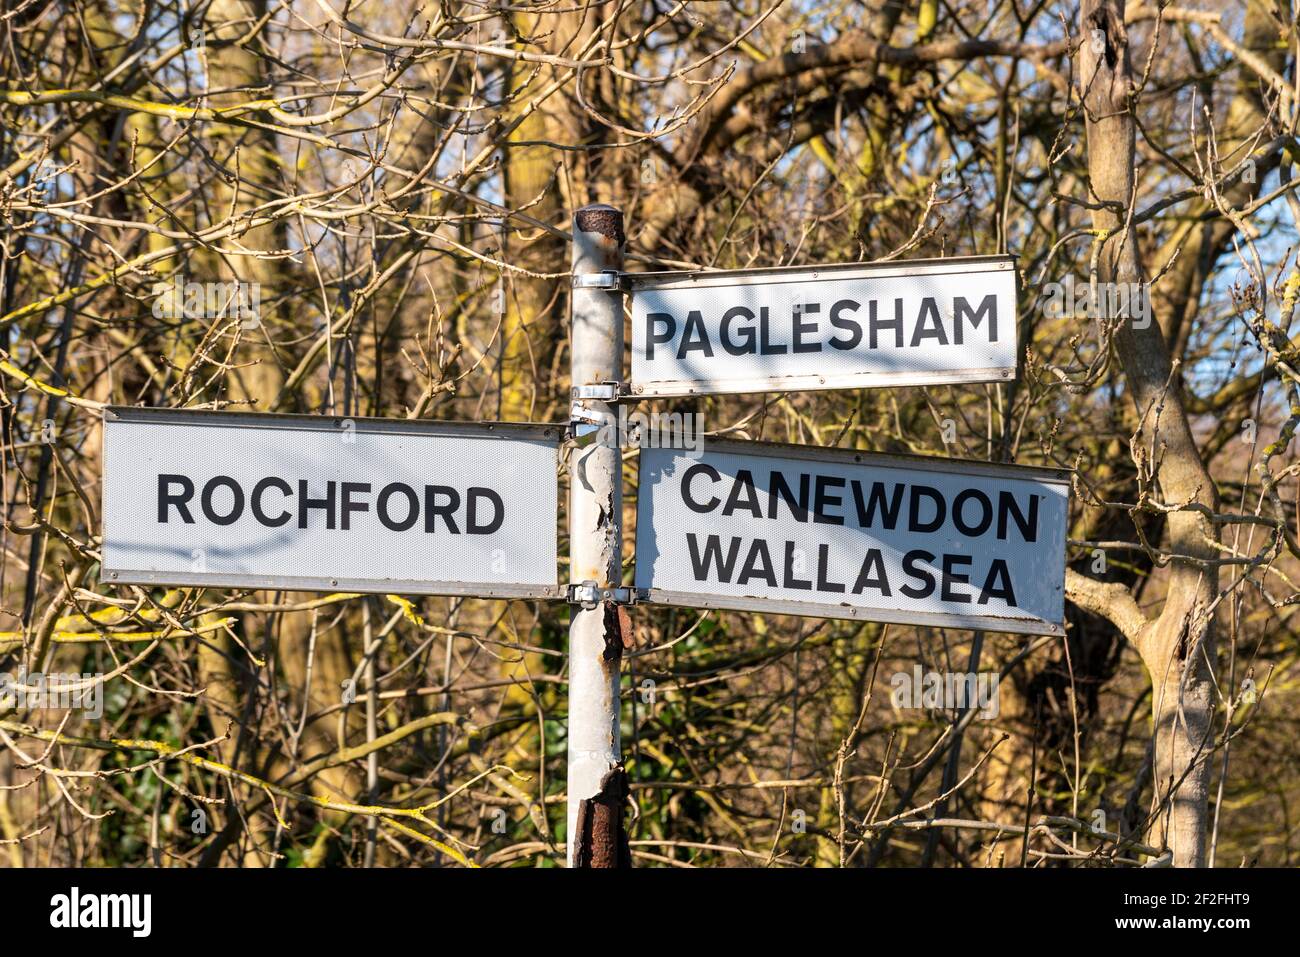 Old road destination sign in Ballards Gore, Stambridge, Essex, UK, with routes to Rochford, Paglesham, Canewdon and Wallasea. Woodland country Stock Photo